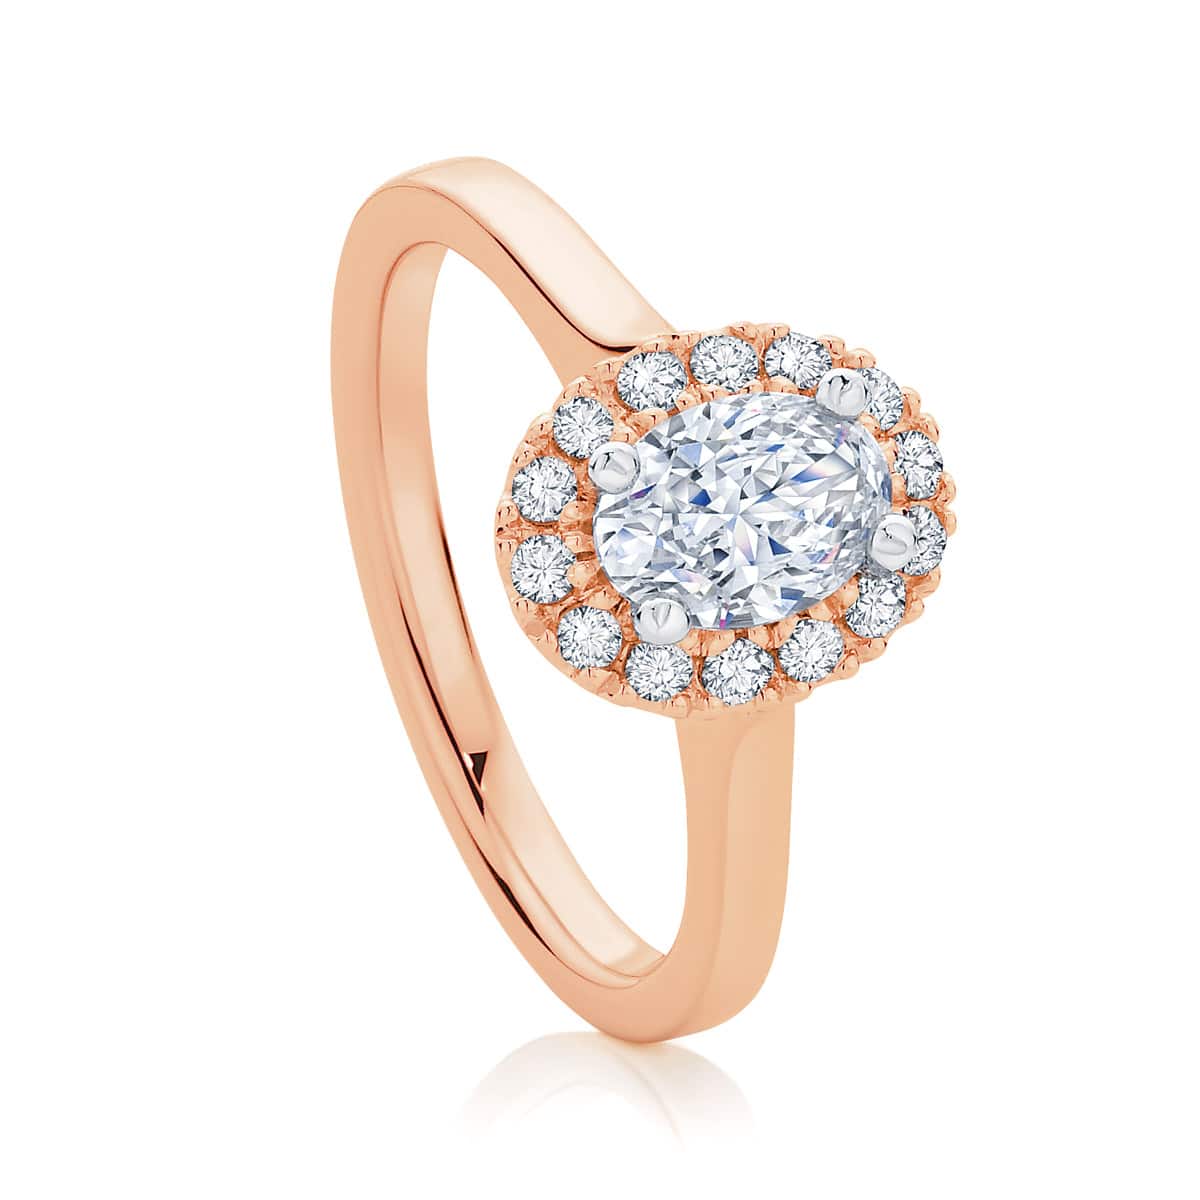 Oval Halo Engagement Ring Rose Gold | Bloom